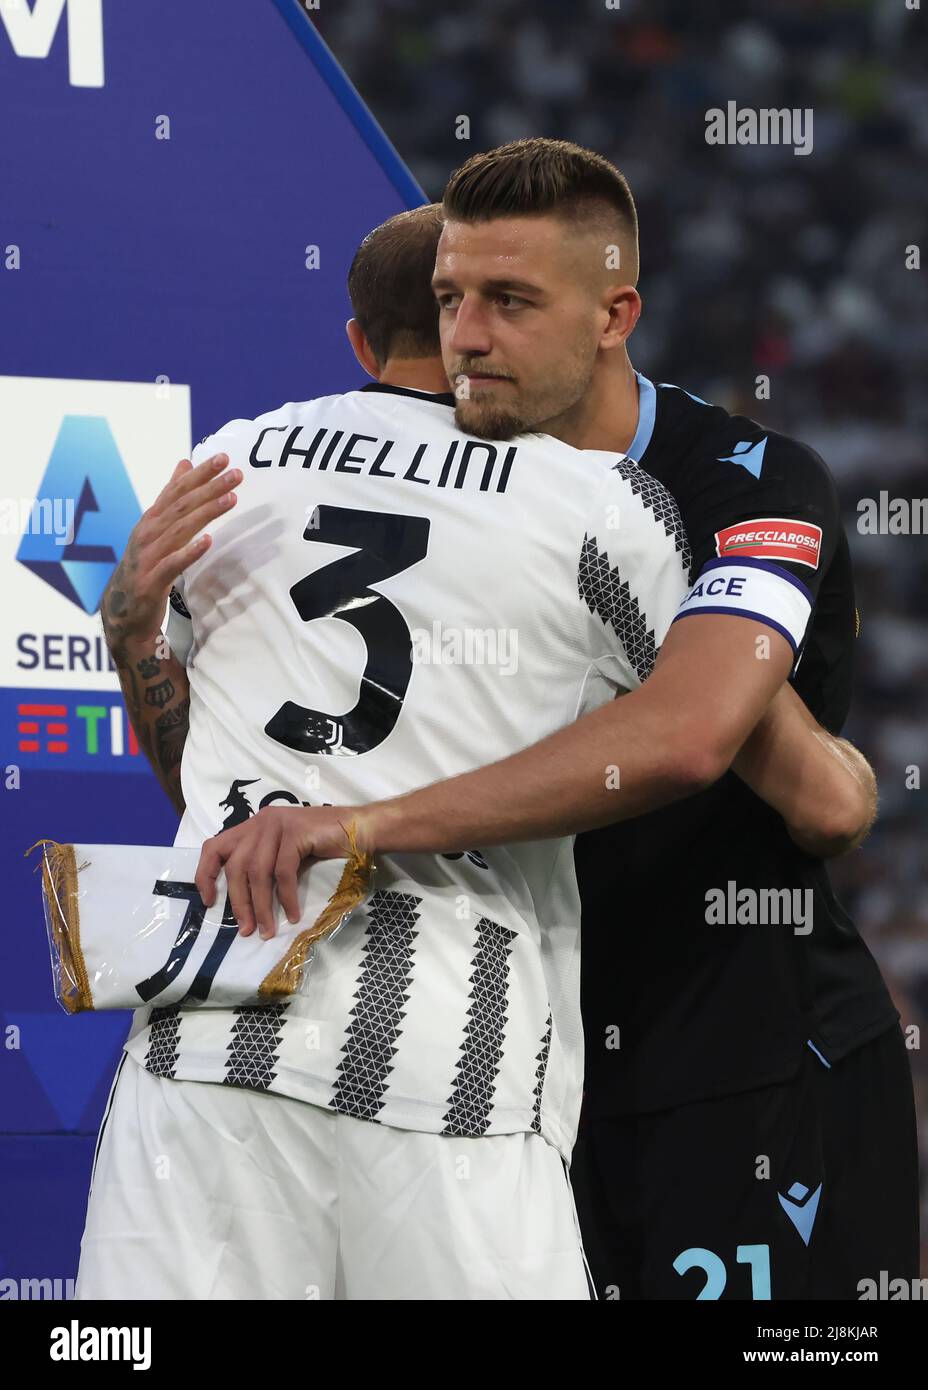 Turin, Italy. 16th May, 2022. Giorgio Chiellini of Juventus embraces Sergej Milinkovic-Savic of SS Lazio at the coin toss prior to kick off in the Serie A match at Allianz Stadium, Turin. Picture credit should read: Jonathan Moscrop/Sportimage Credit: Sportimage/Alamy Live News Stock Photo